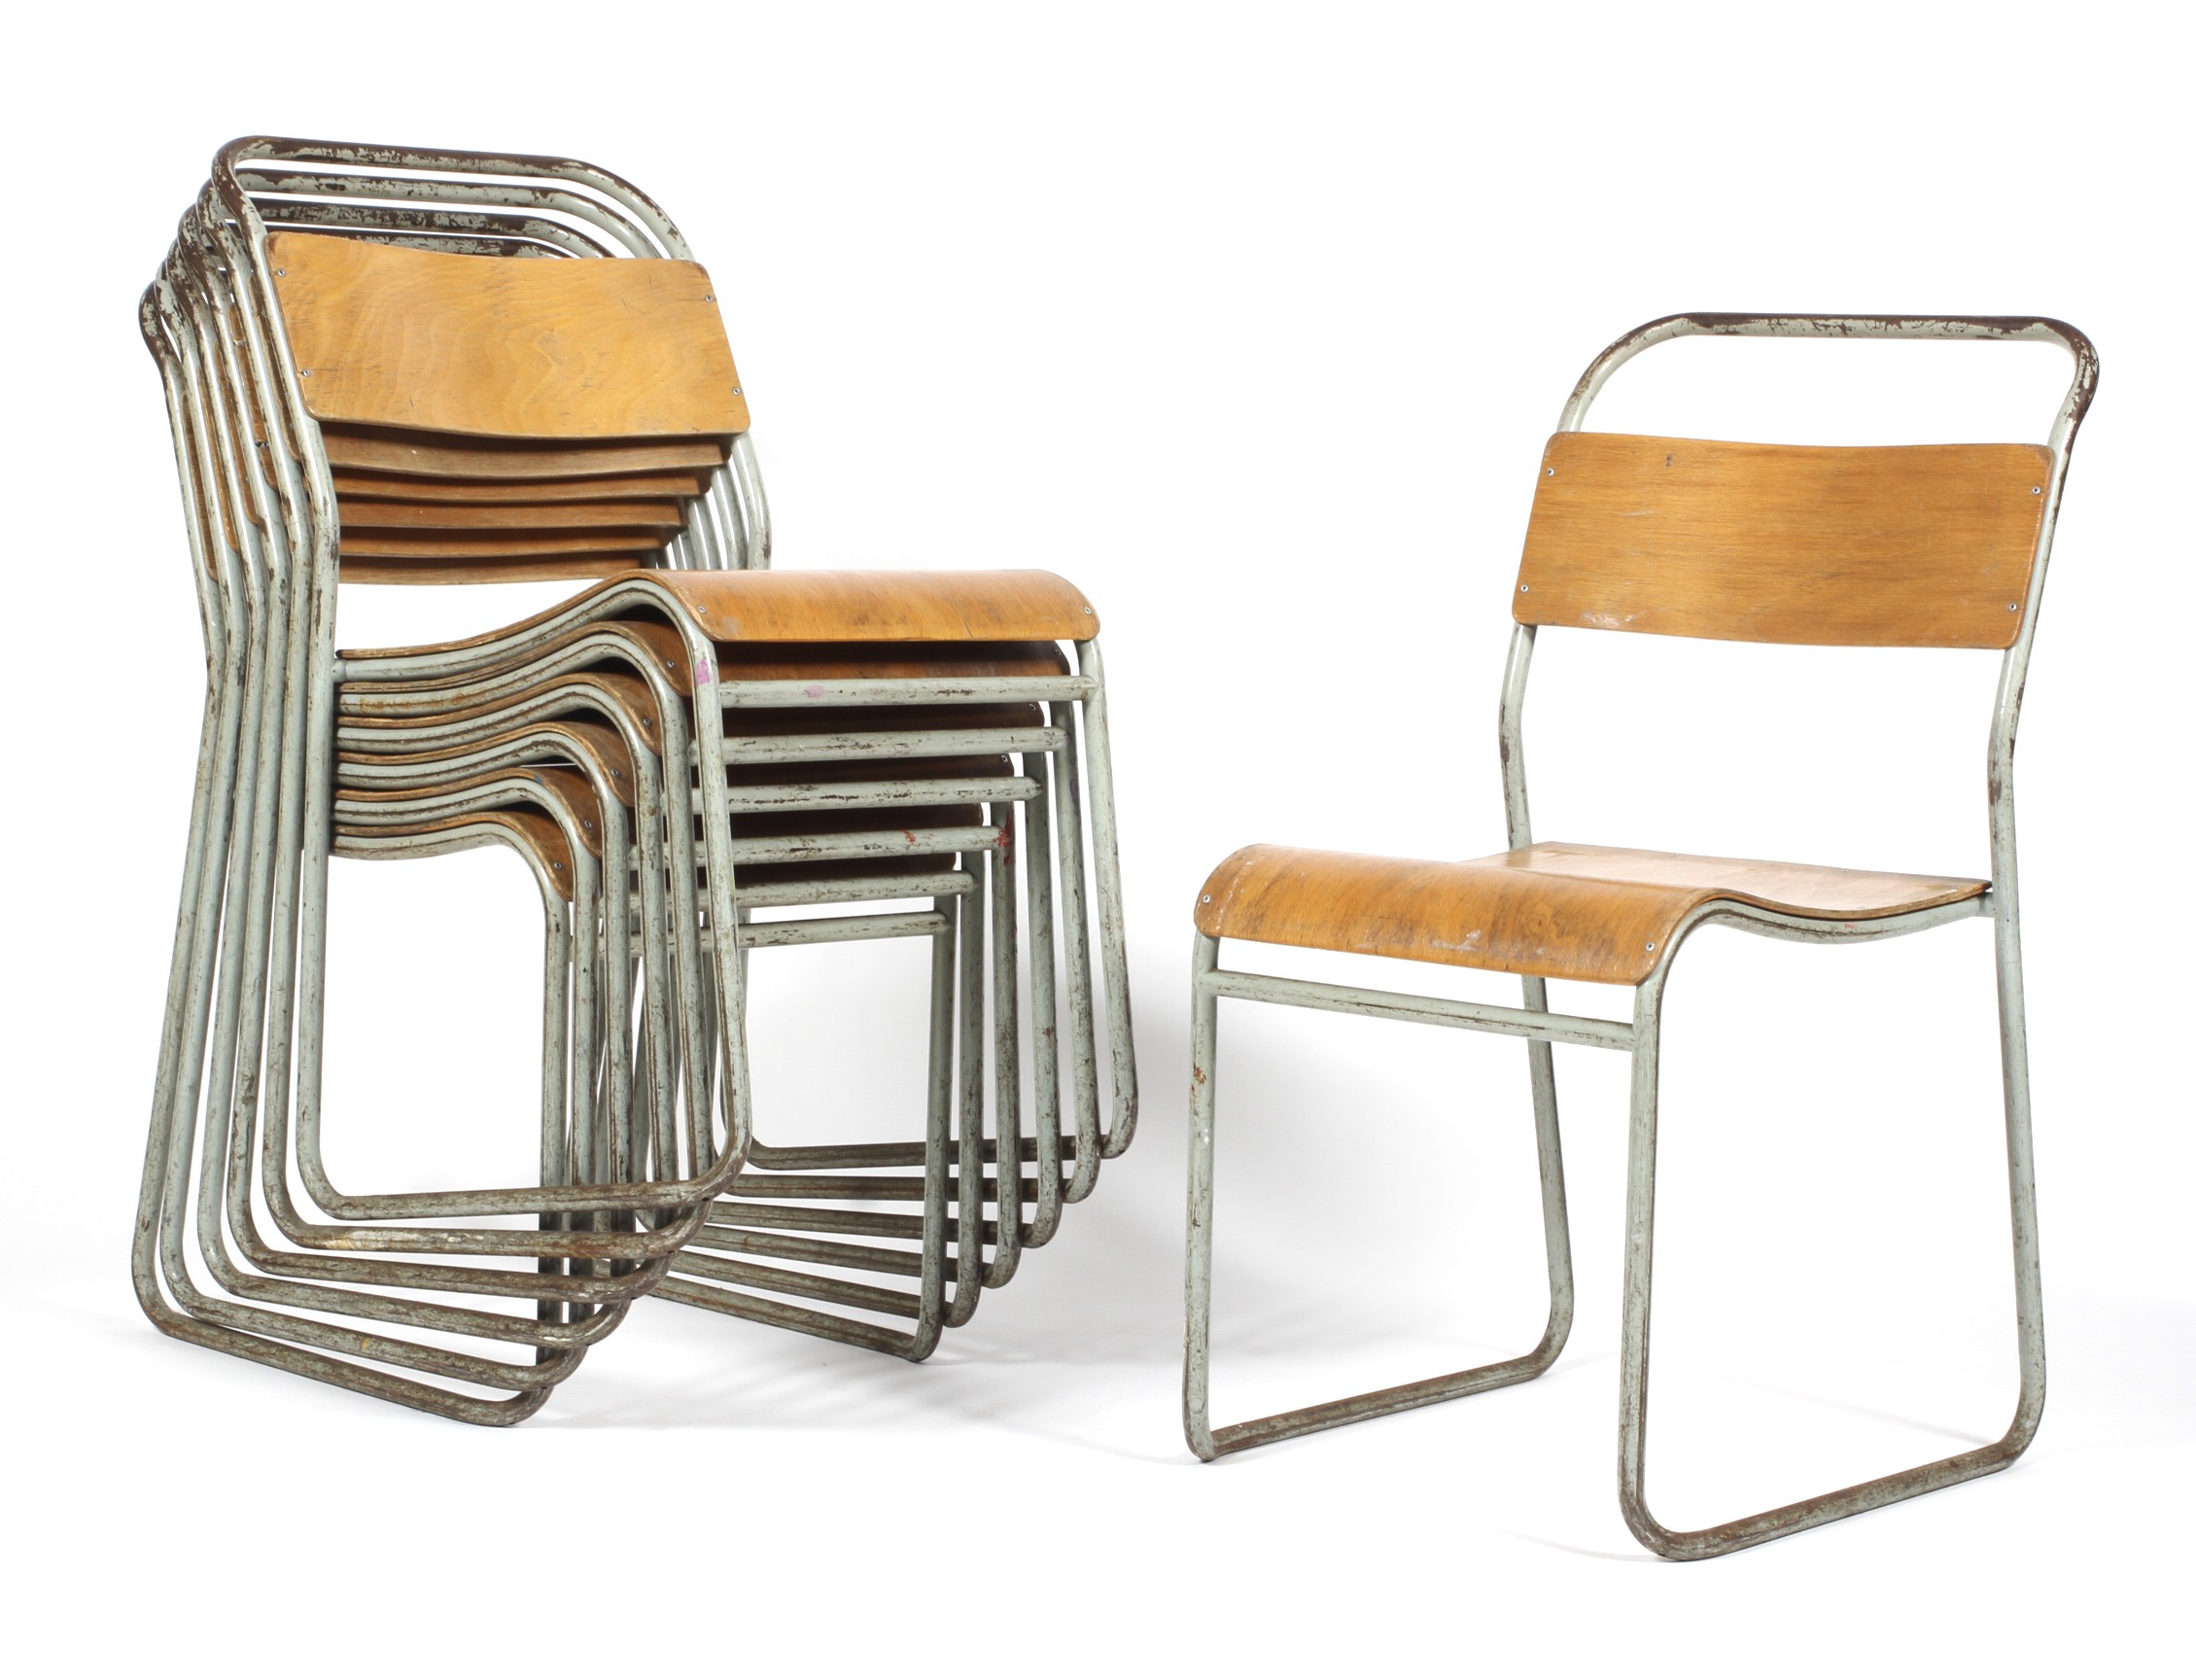 Seven mid-20th century REL vintage steel framed and bent plywood stackable chairs.